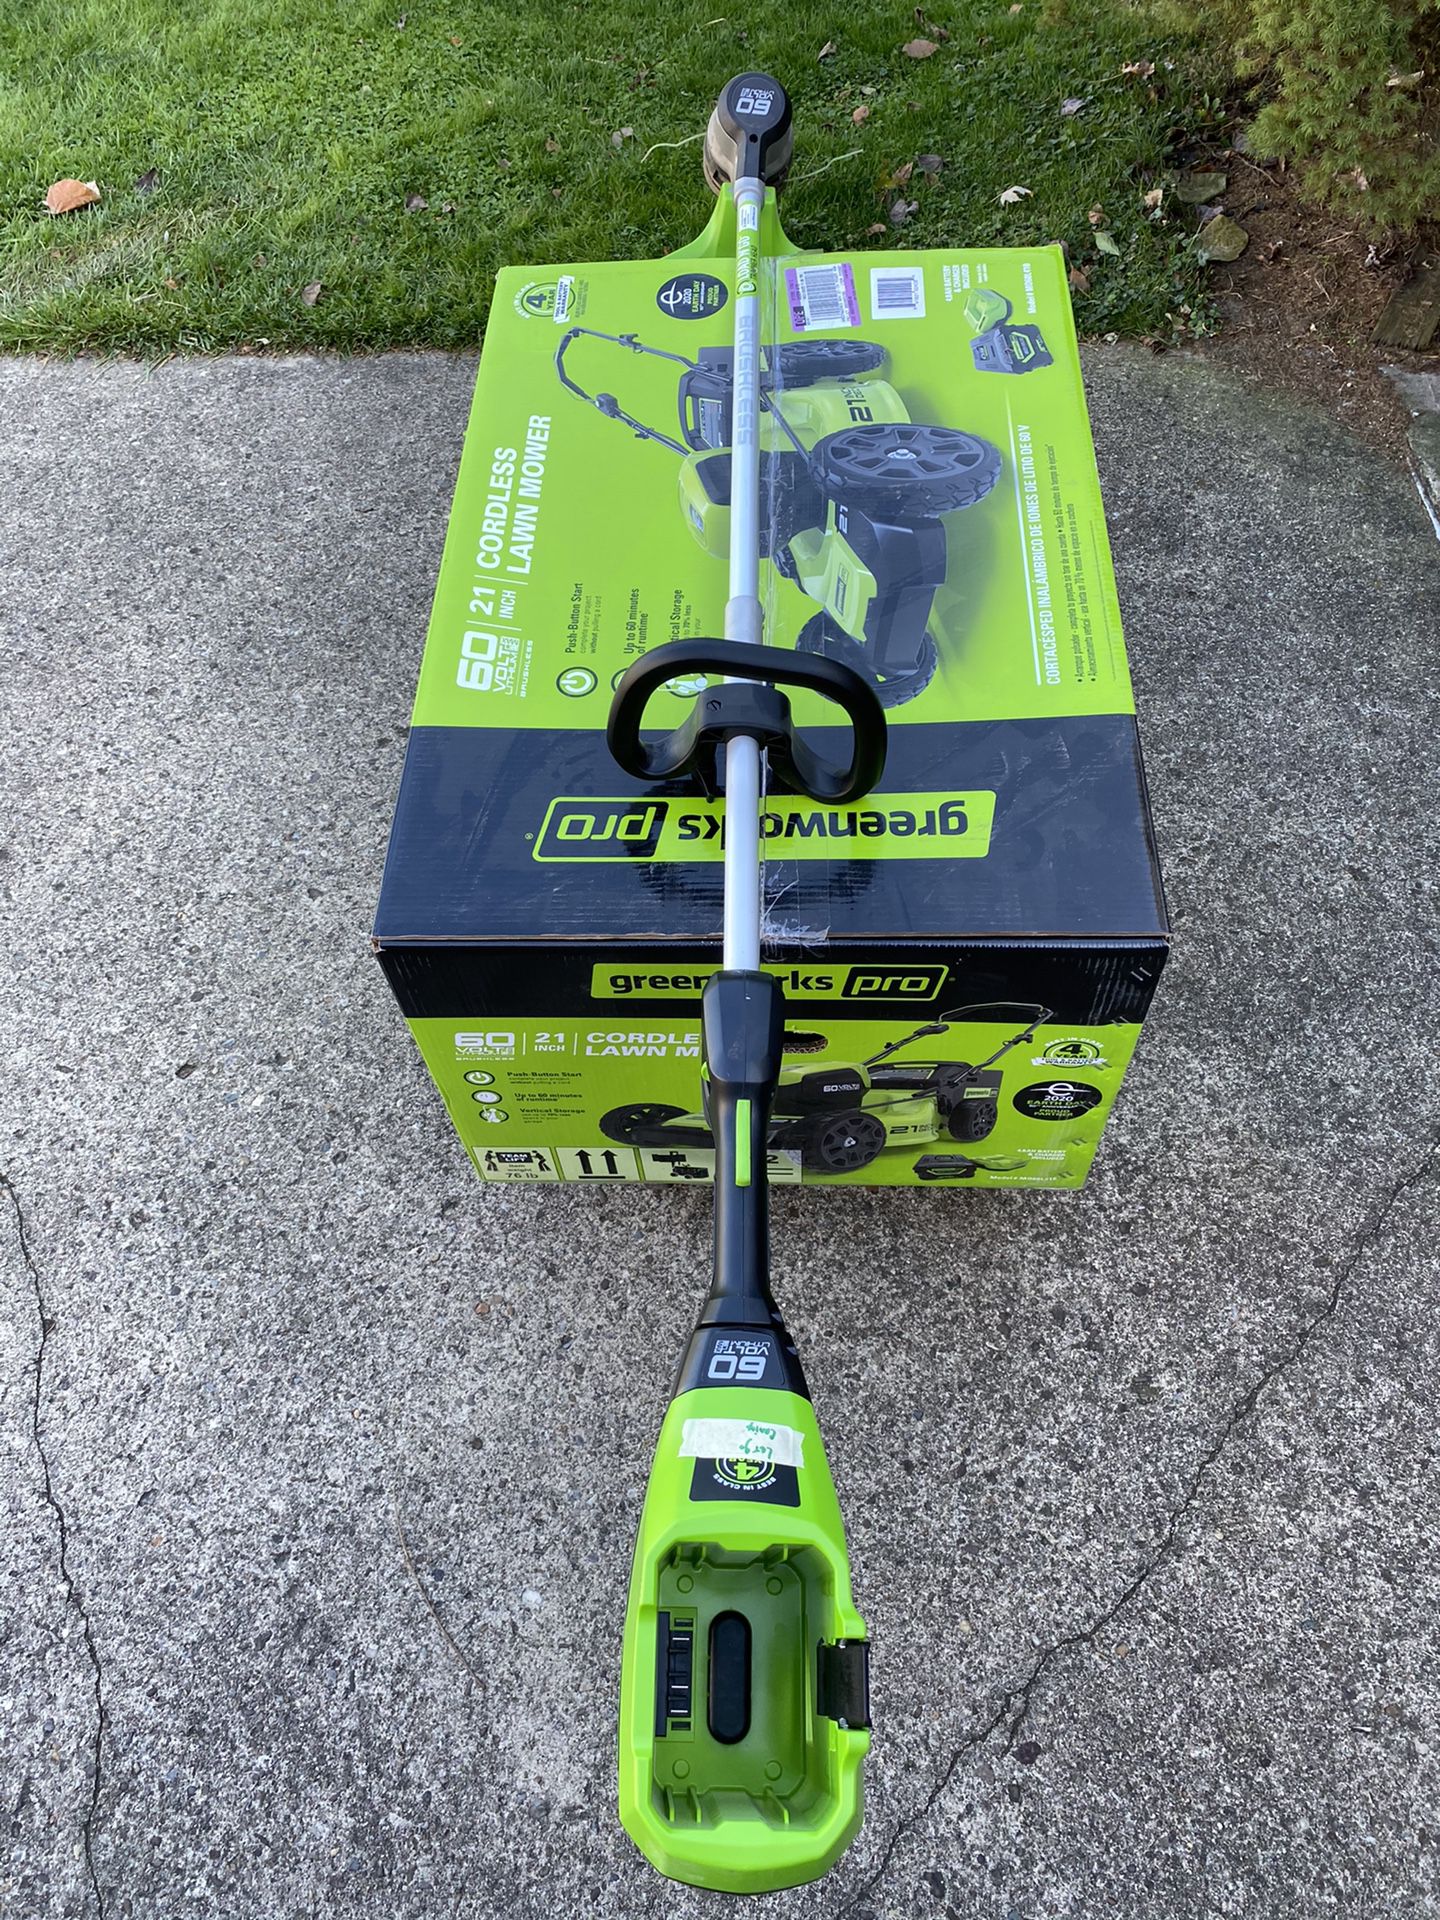 Brand new greenworks 60v Lawn mower And Weed Eater